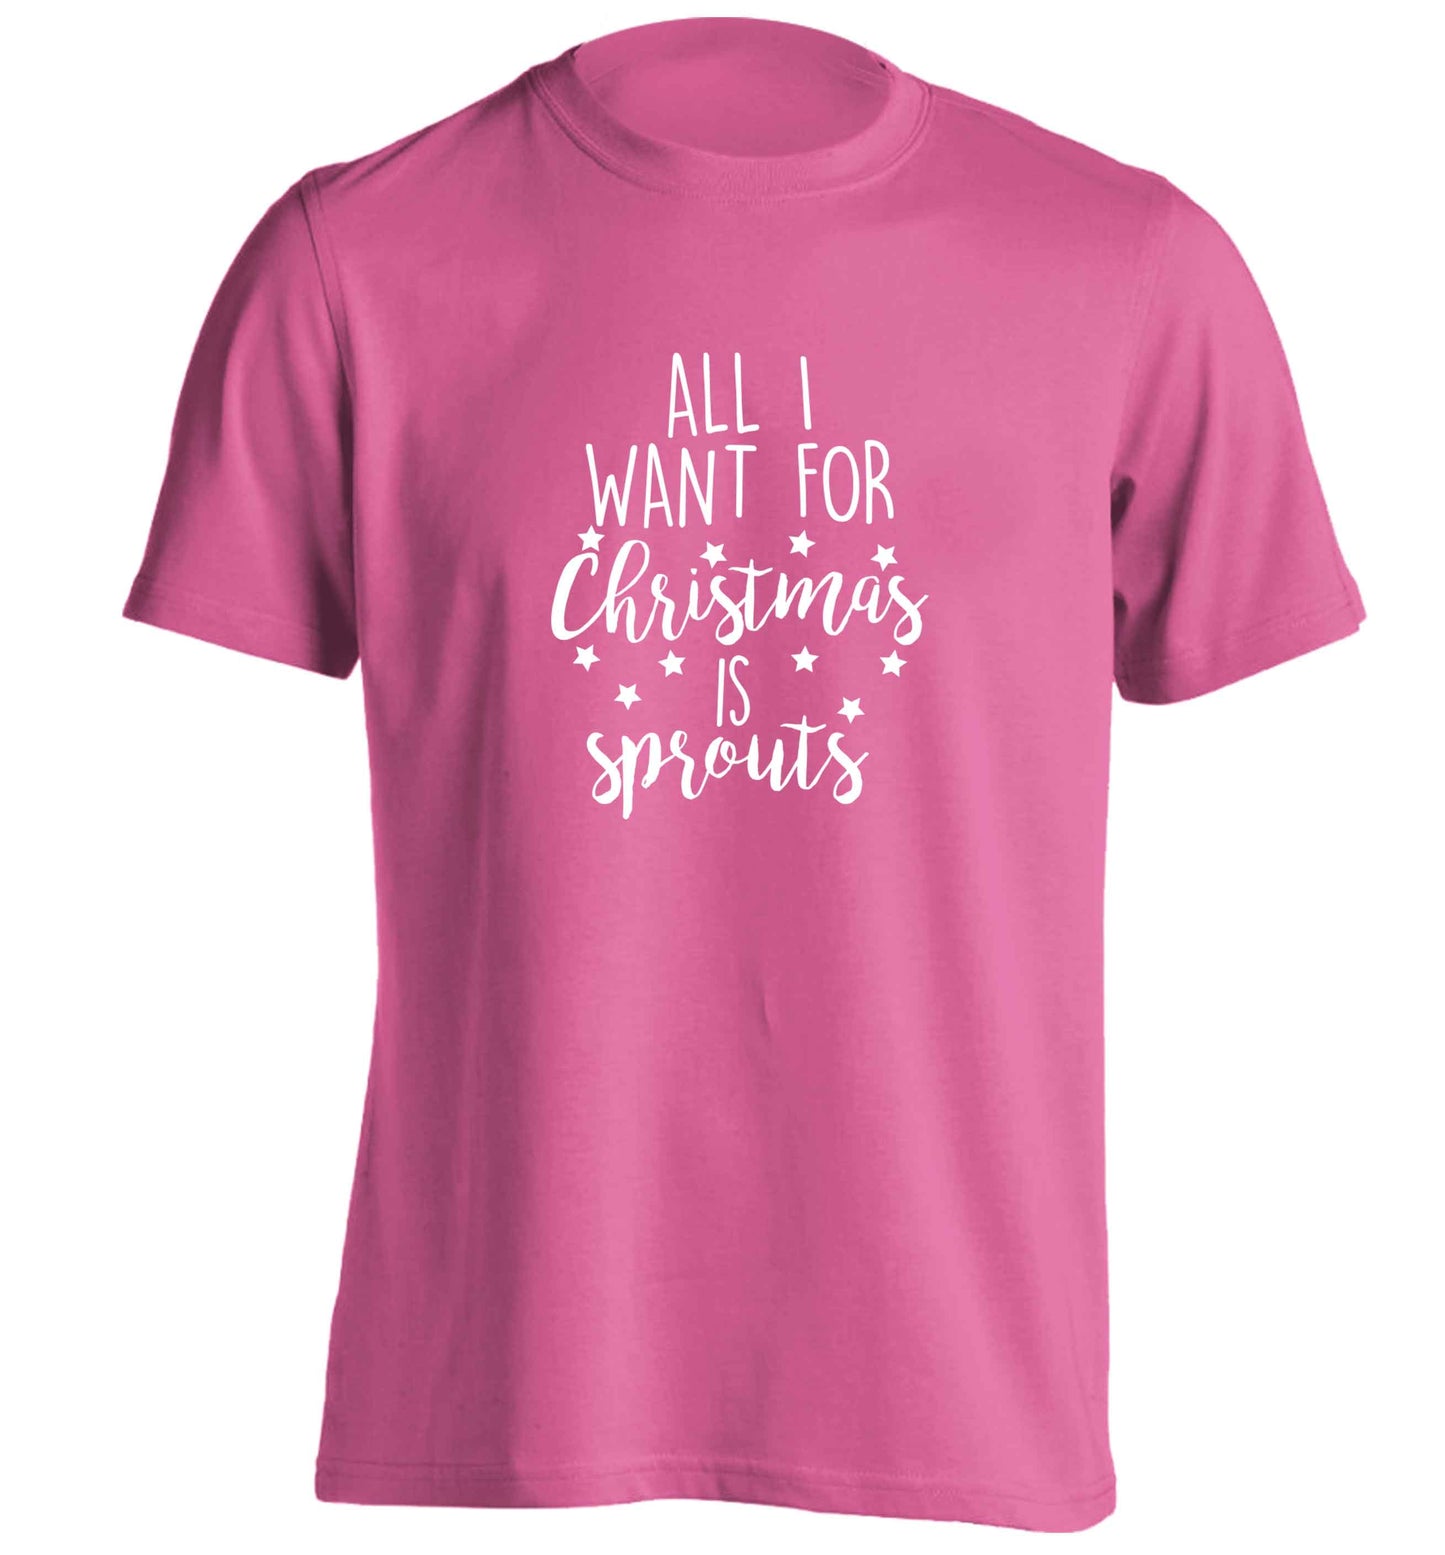 All I want for Christmas is sprouts adults unisex pink Tshirt 2XL